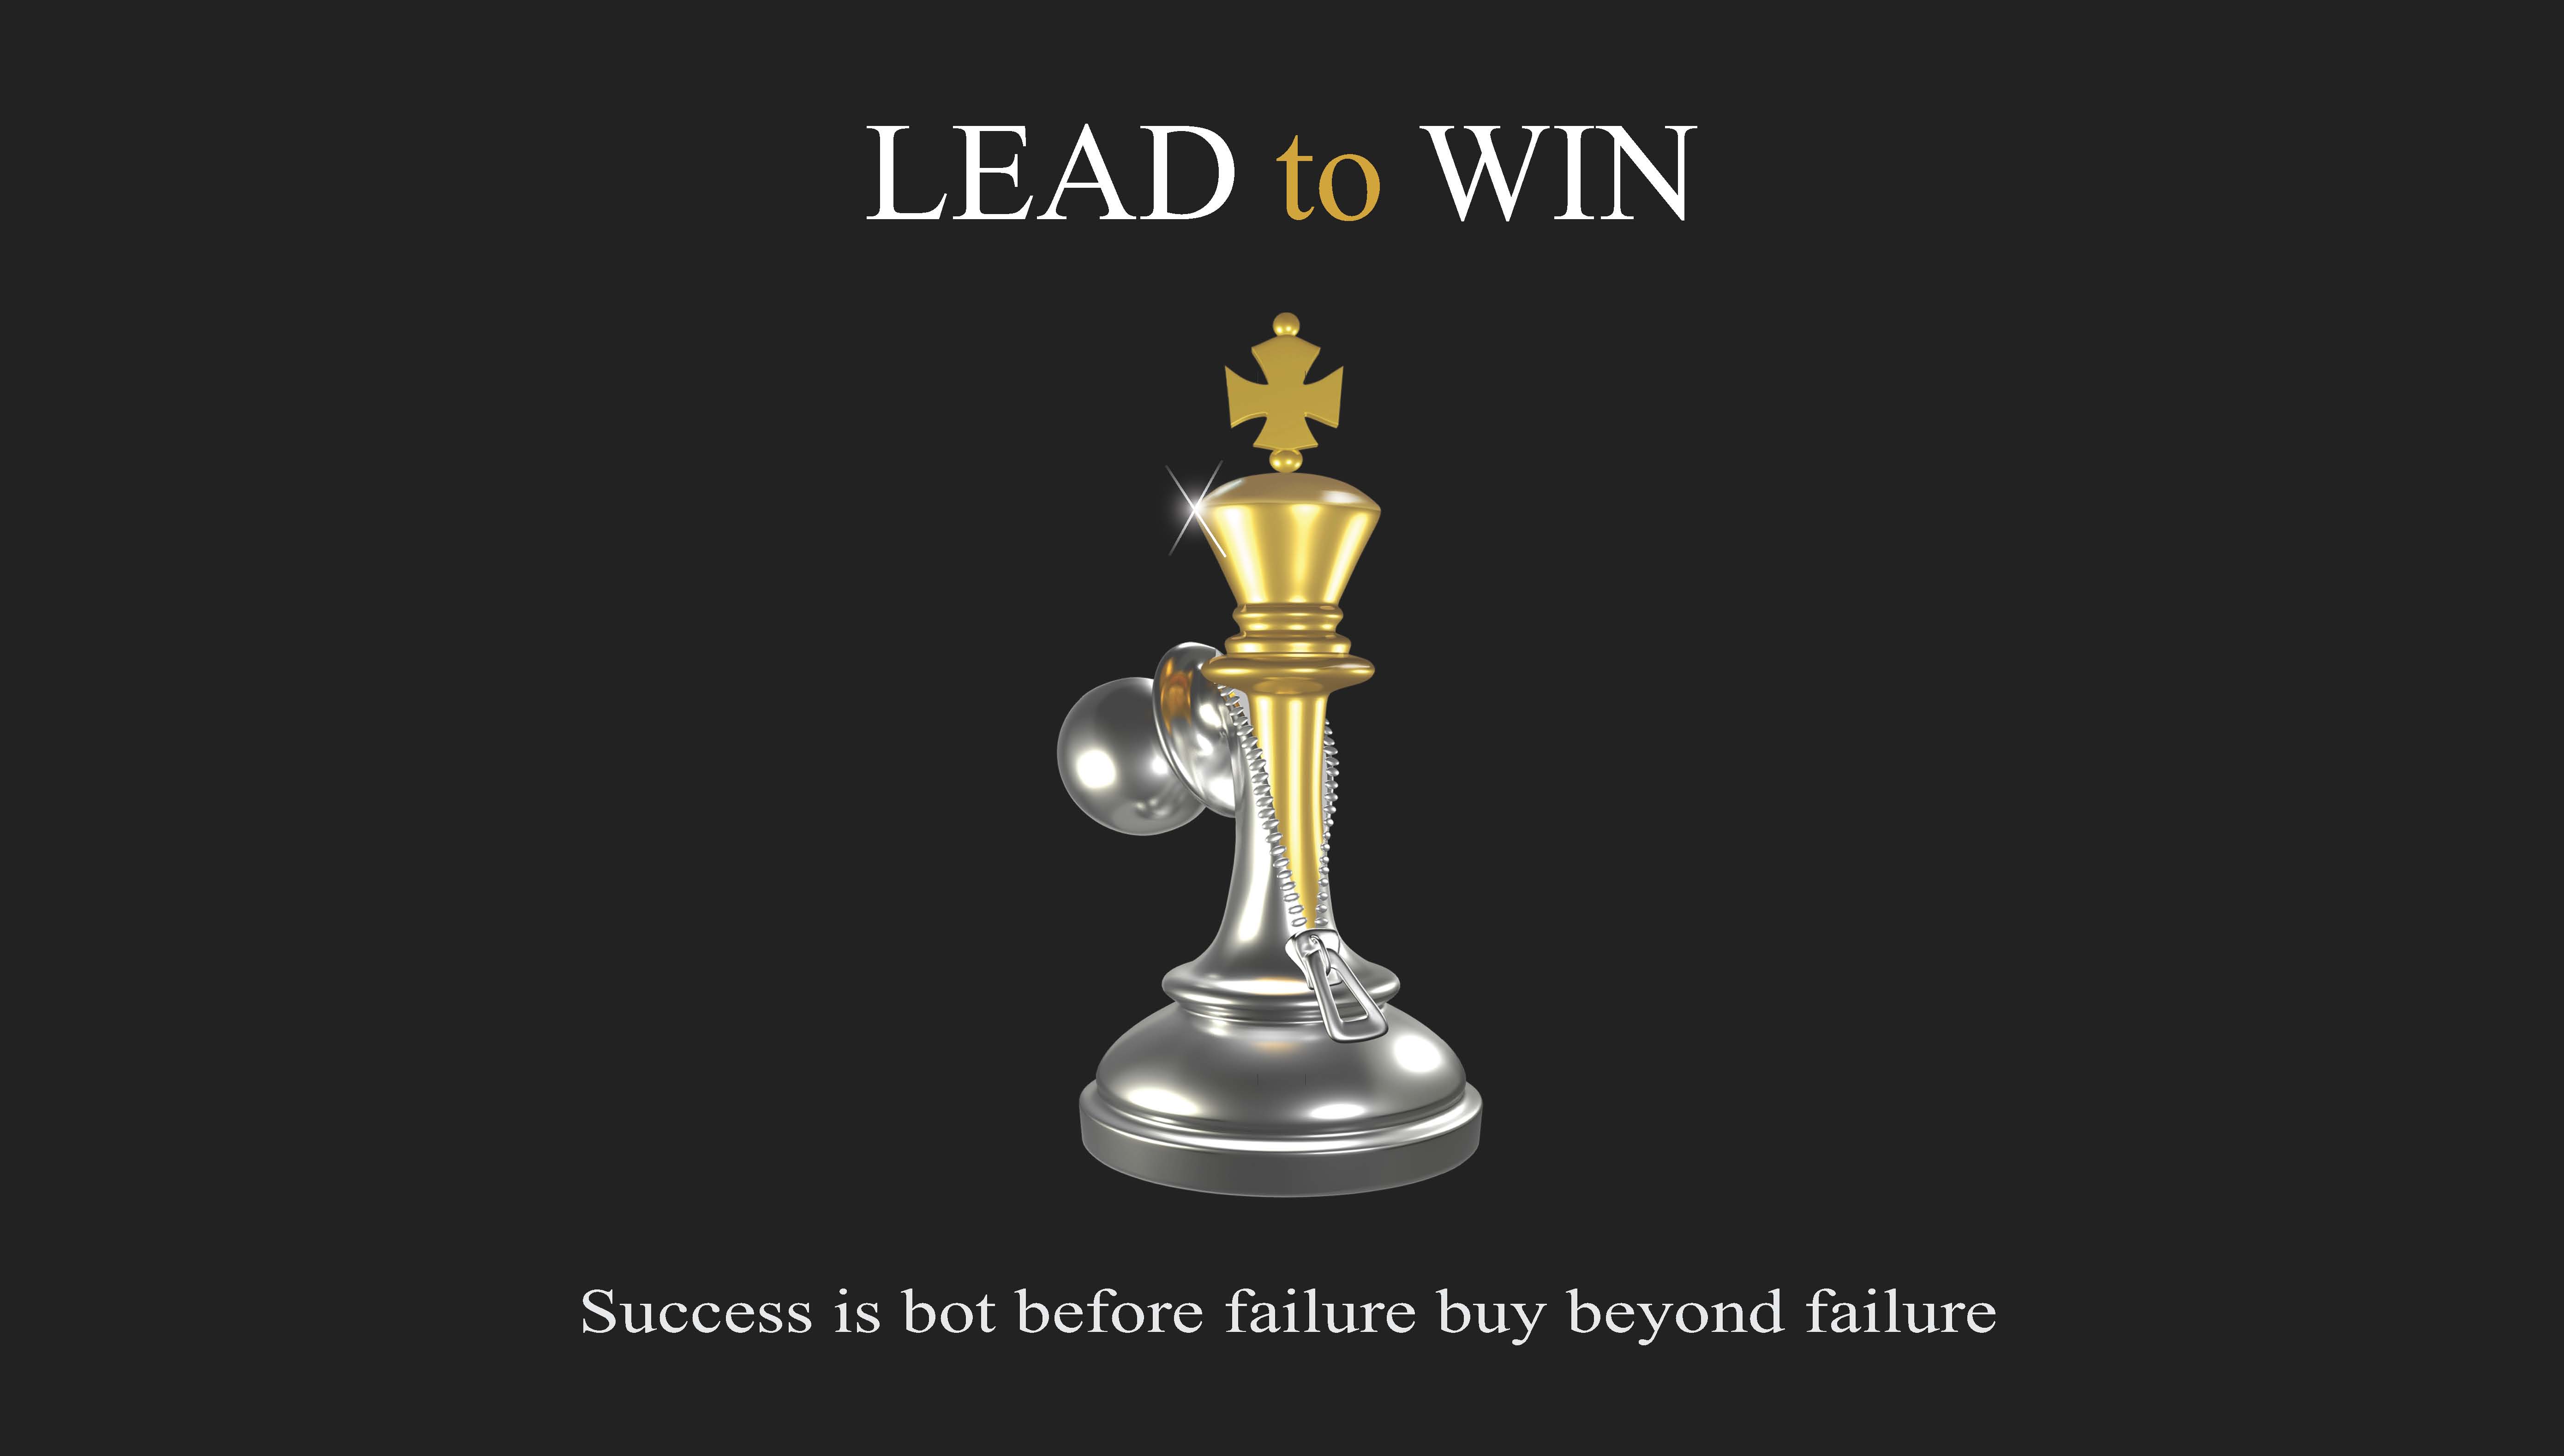 Lead to win